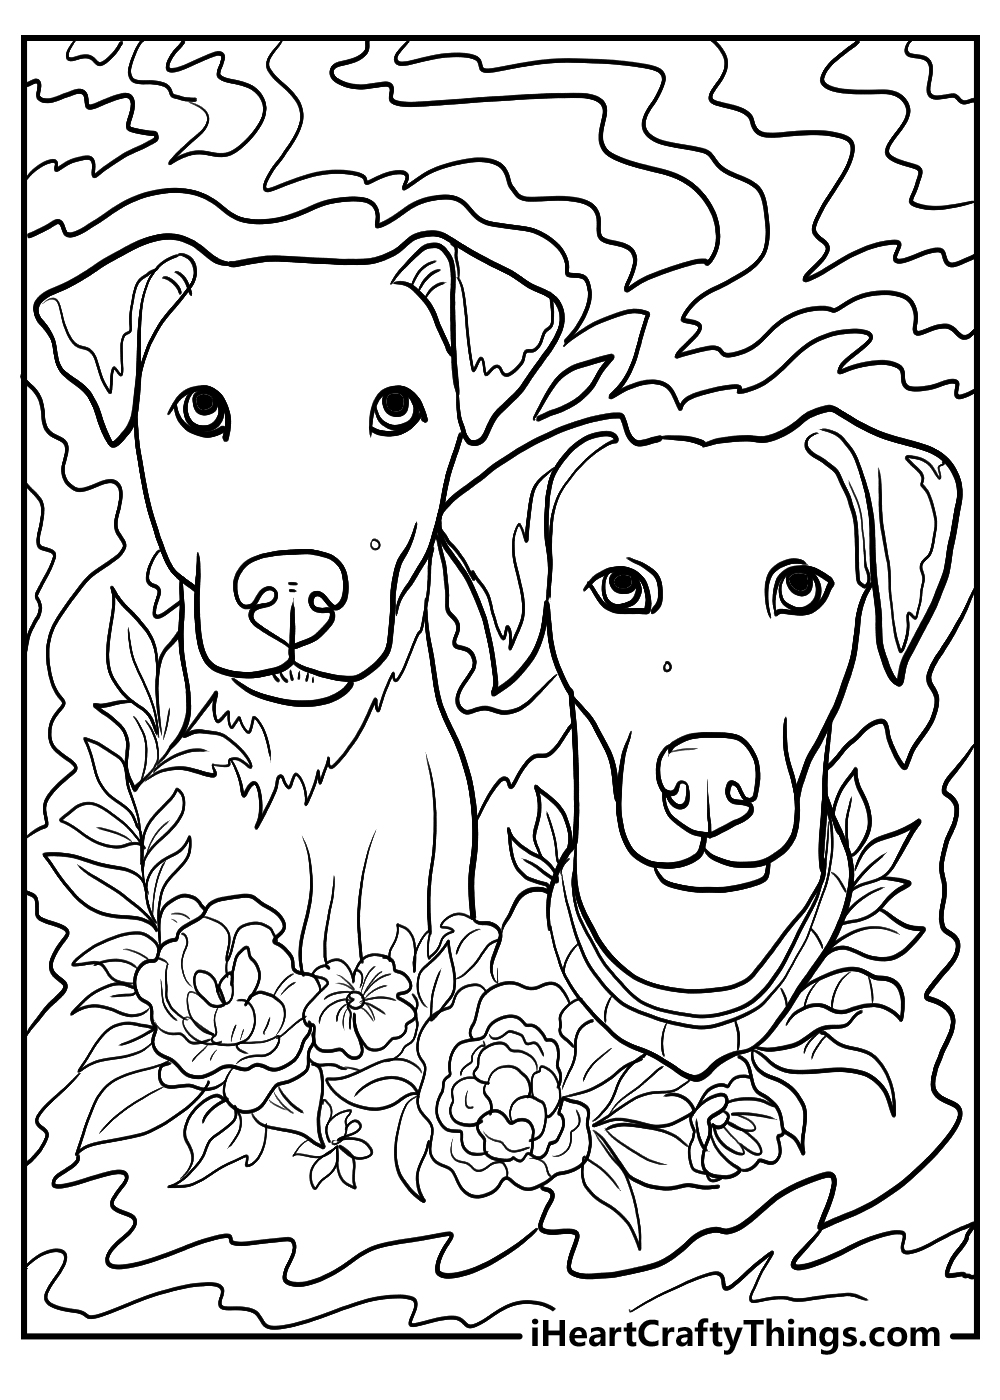 New Lisa Frank Coloring Pages